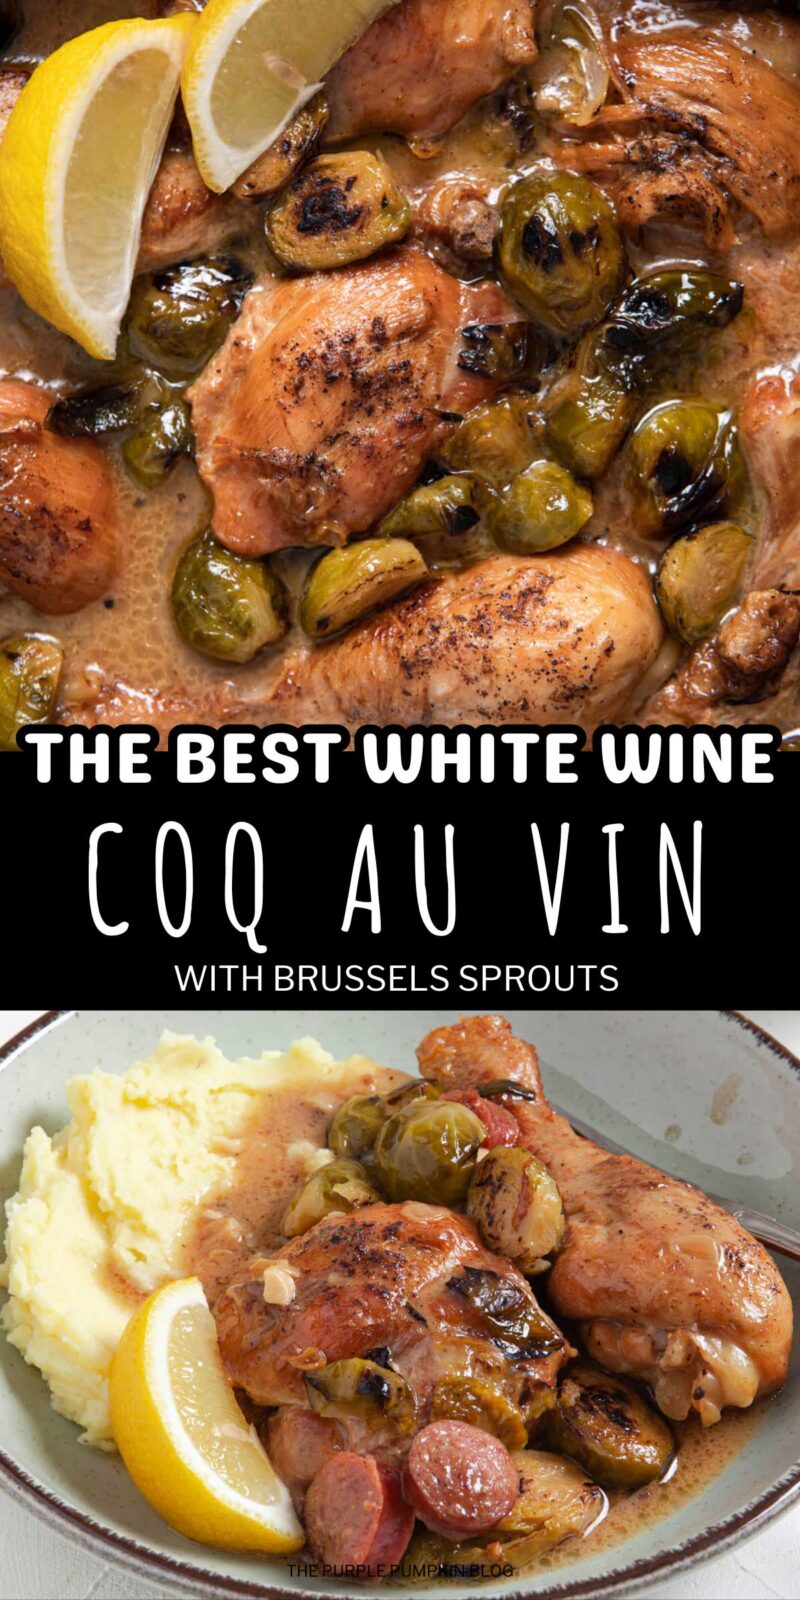 The Best White Wine Coq au Vin with Brussels Sprouts